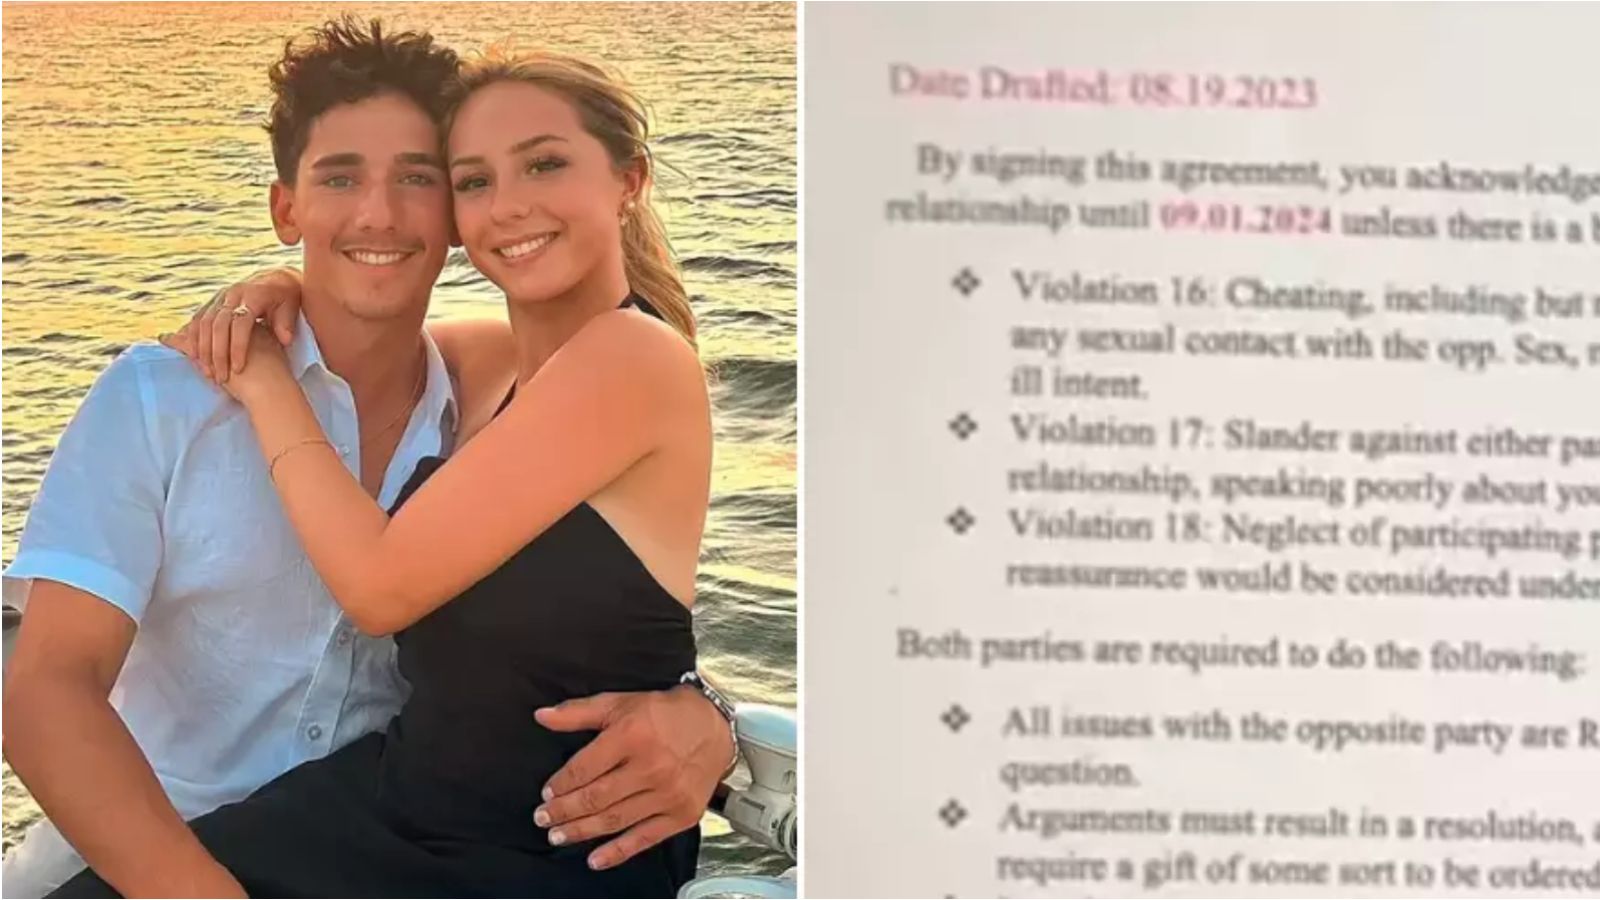 Woman goes viral with contract for partner saying she can sue if he ...